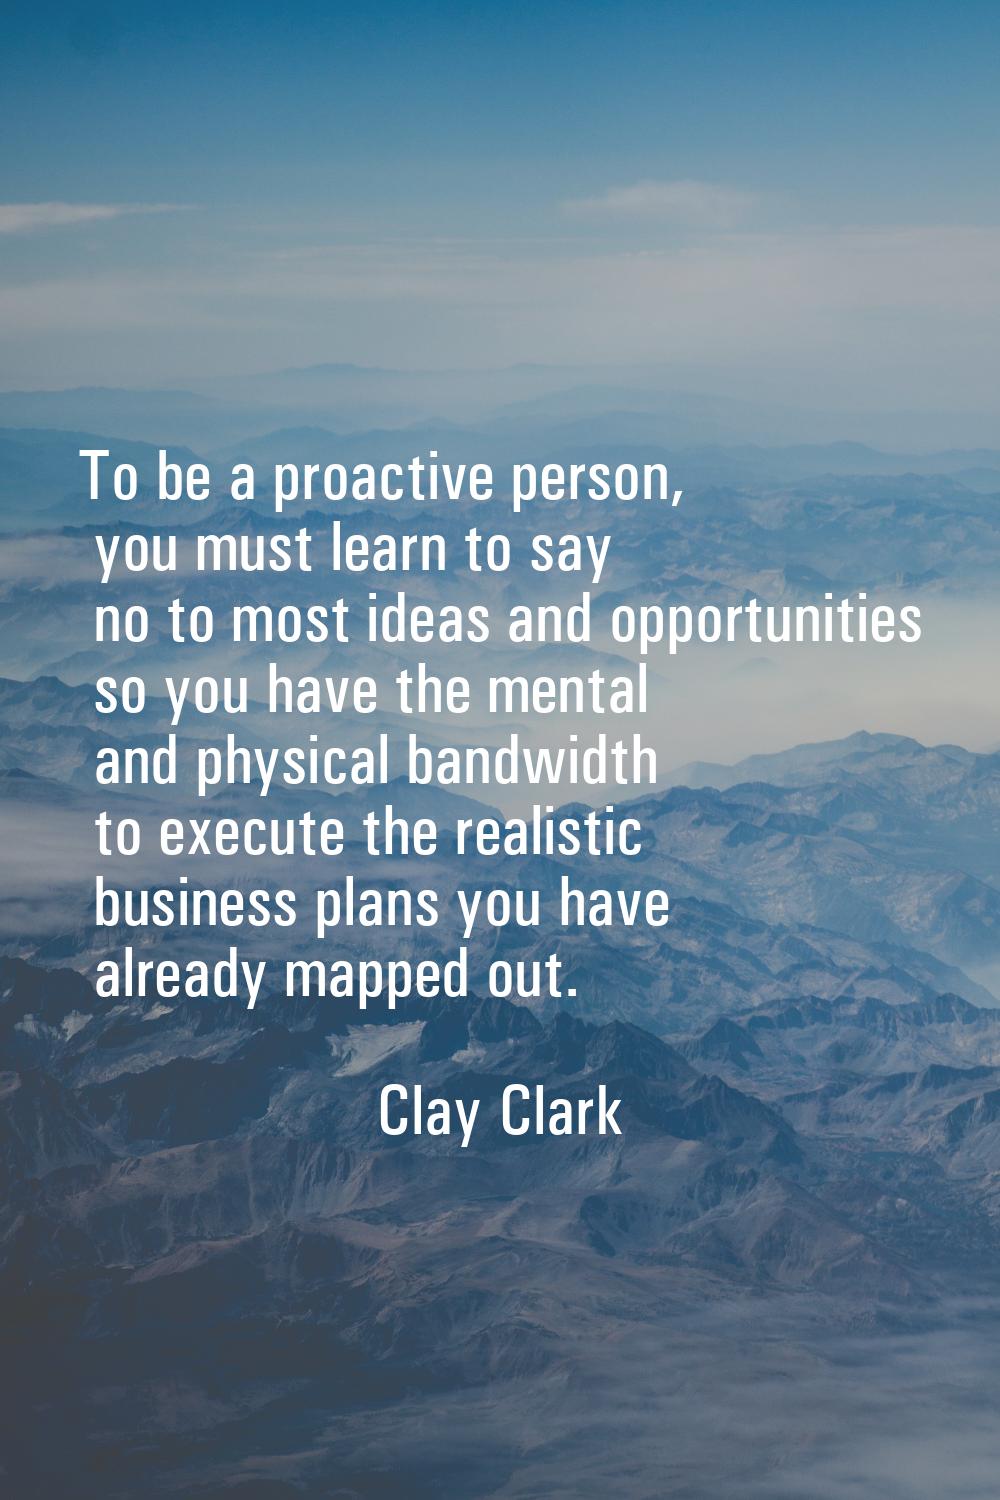 To be a proactive person, you must learn to say no to most ideas and opportunities so you have the 